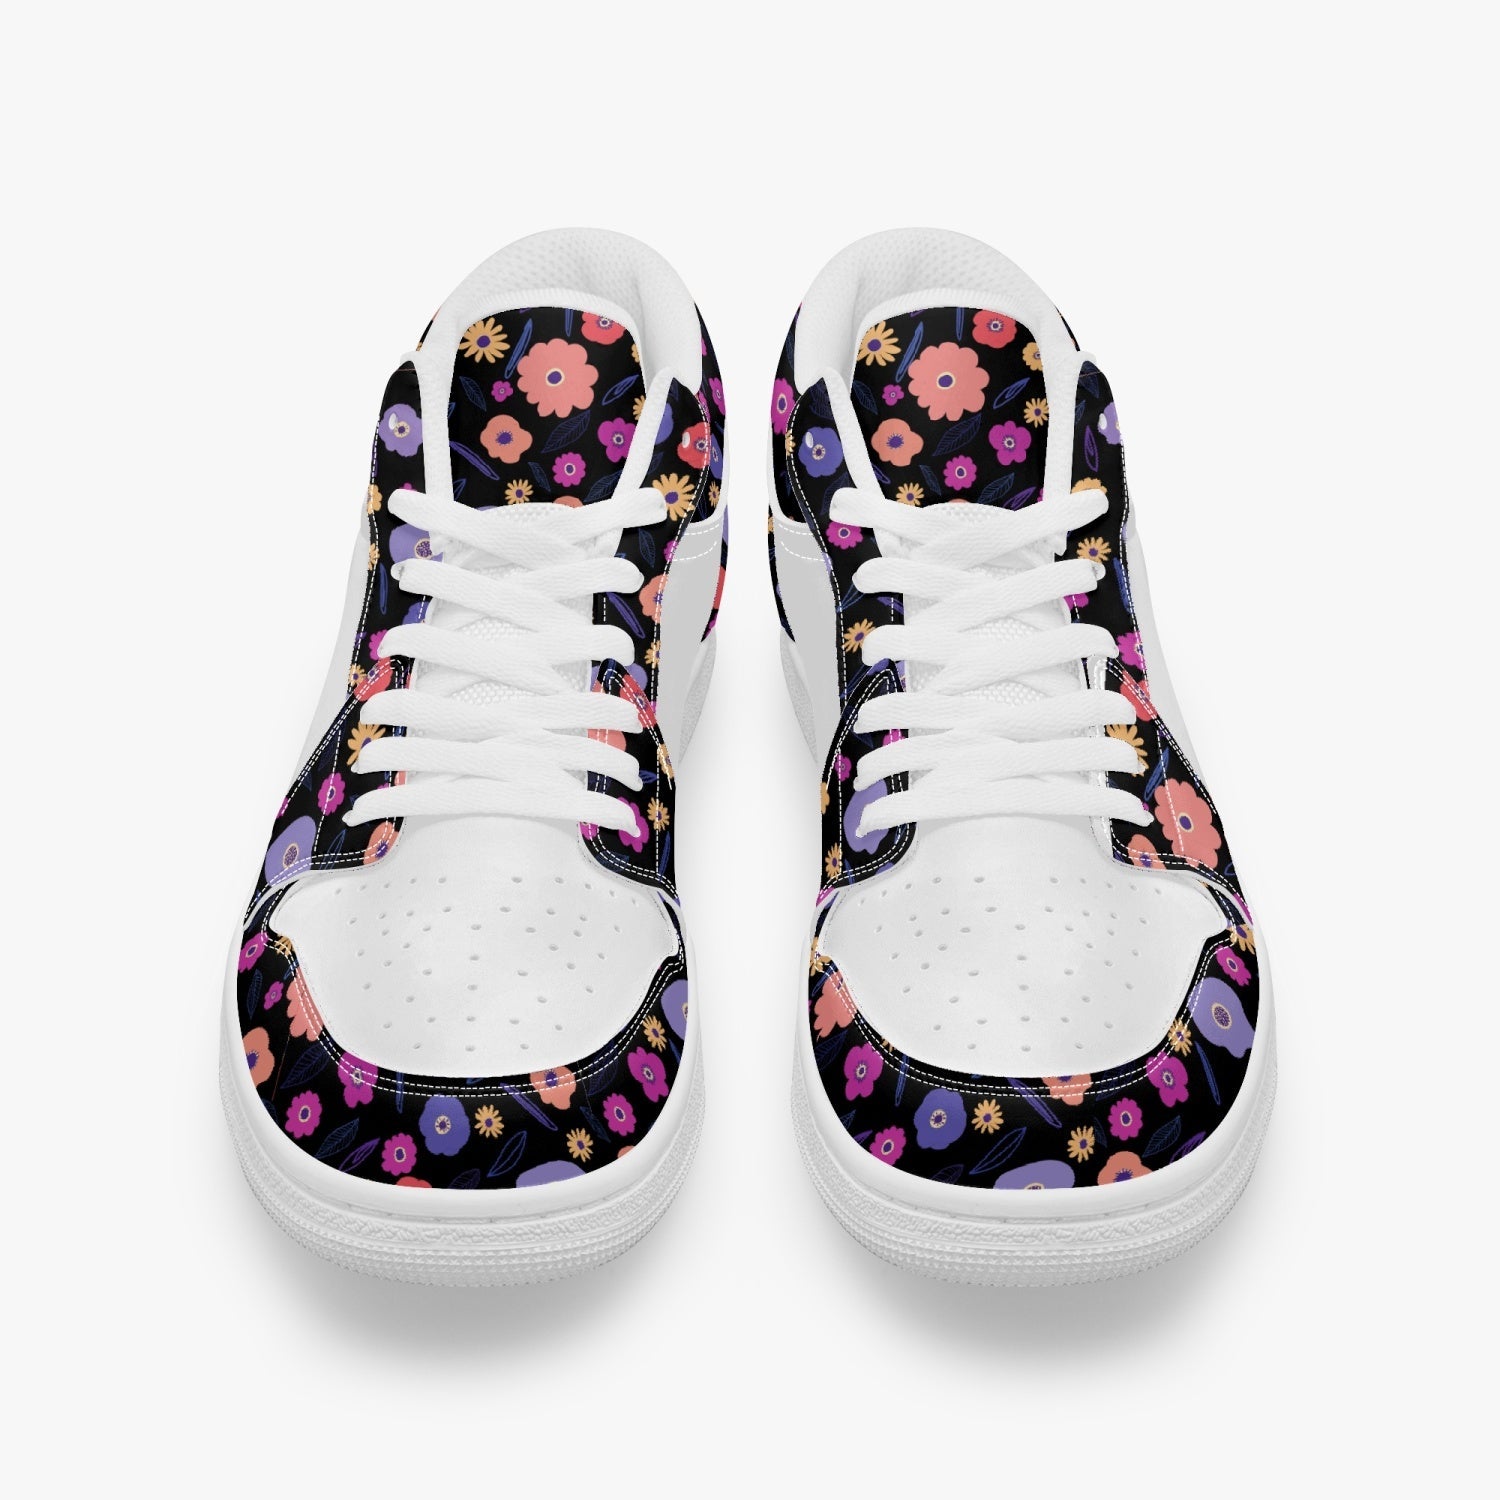 Keep Going Keep Growing Dark Floral Leather Low Top Sneakers - The Kindness Cause